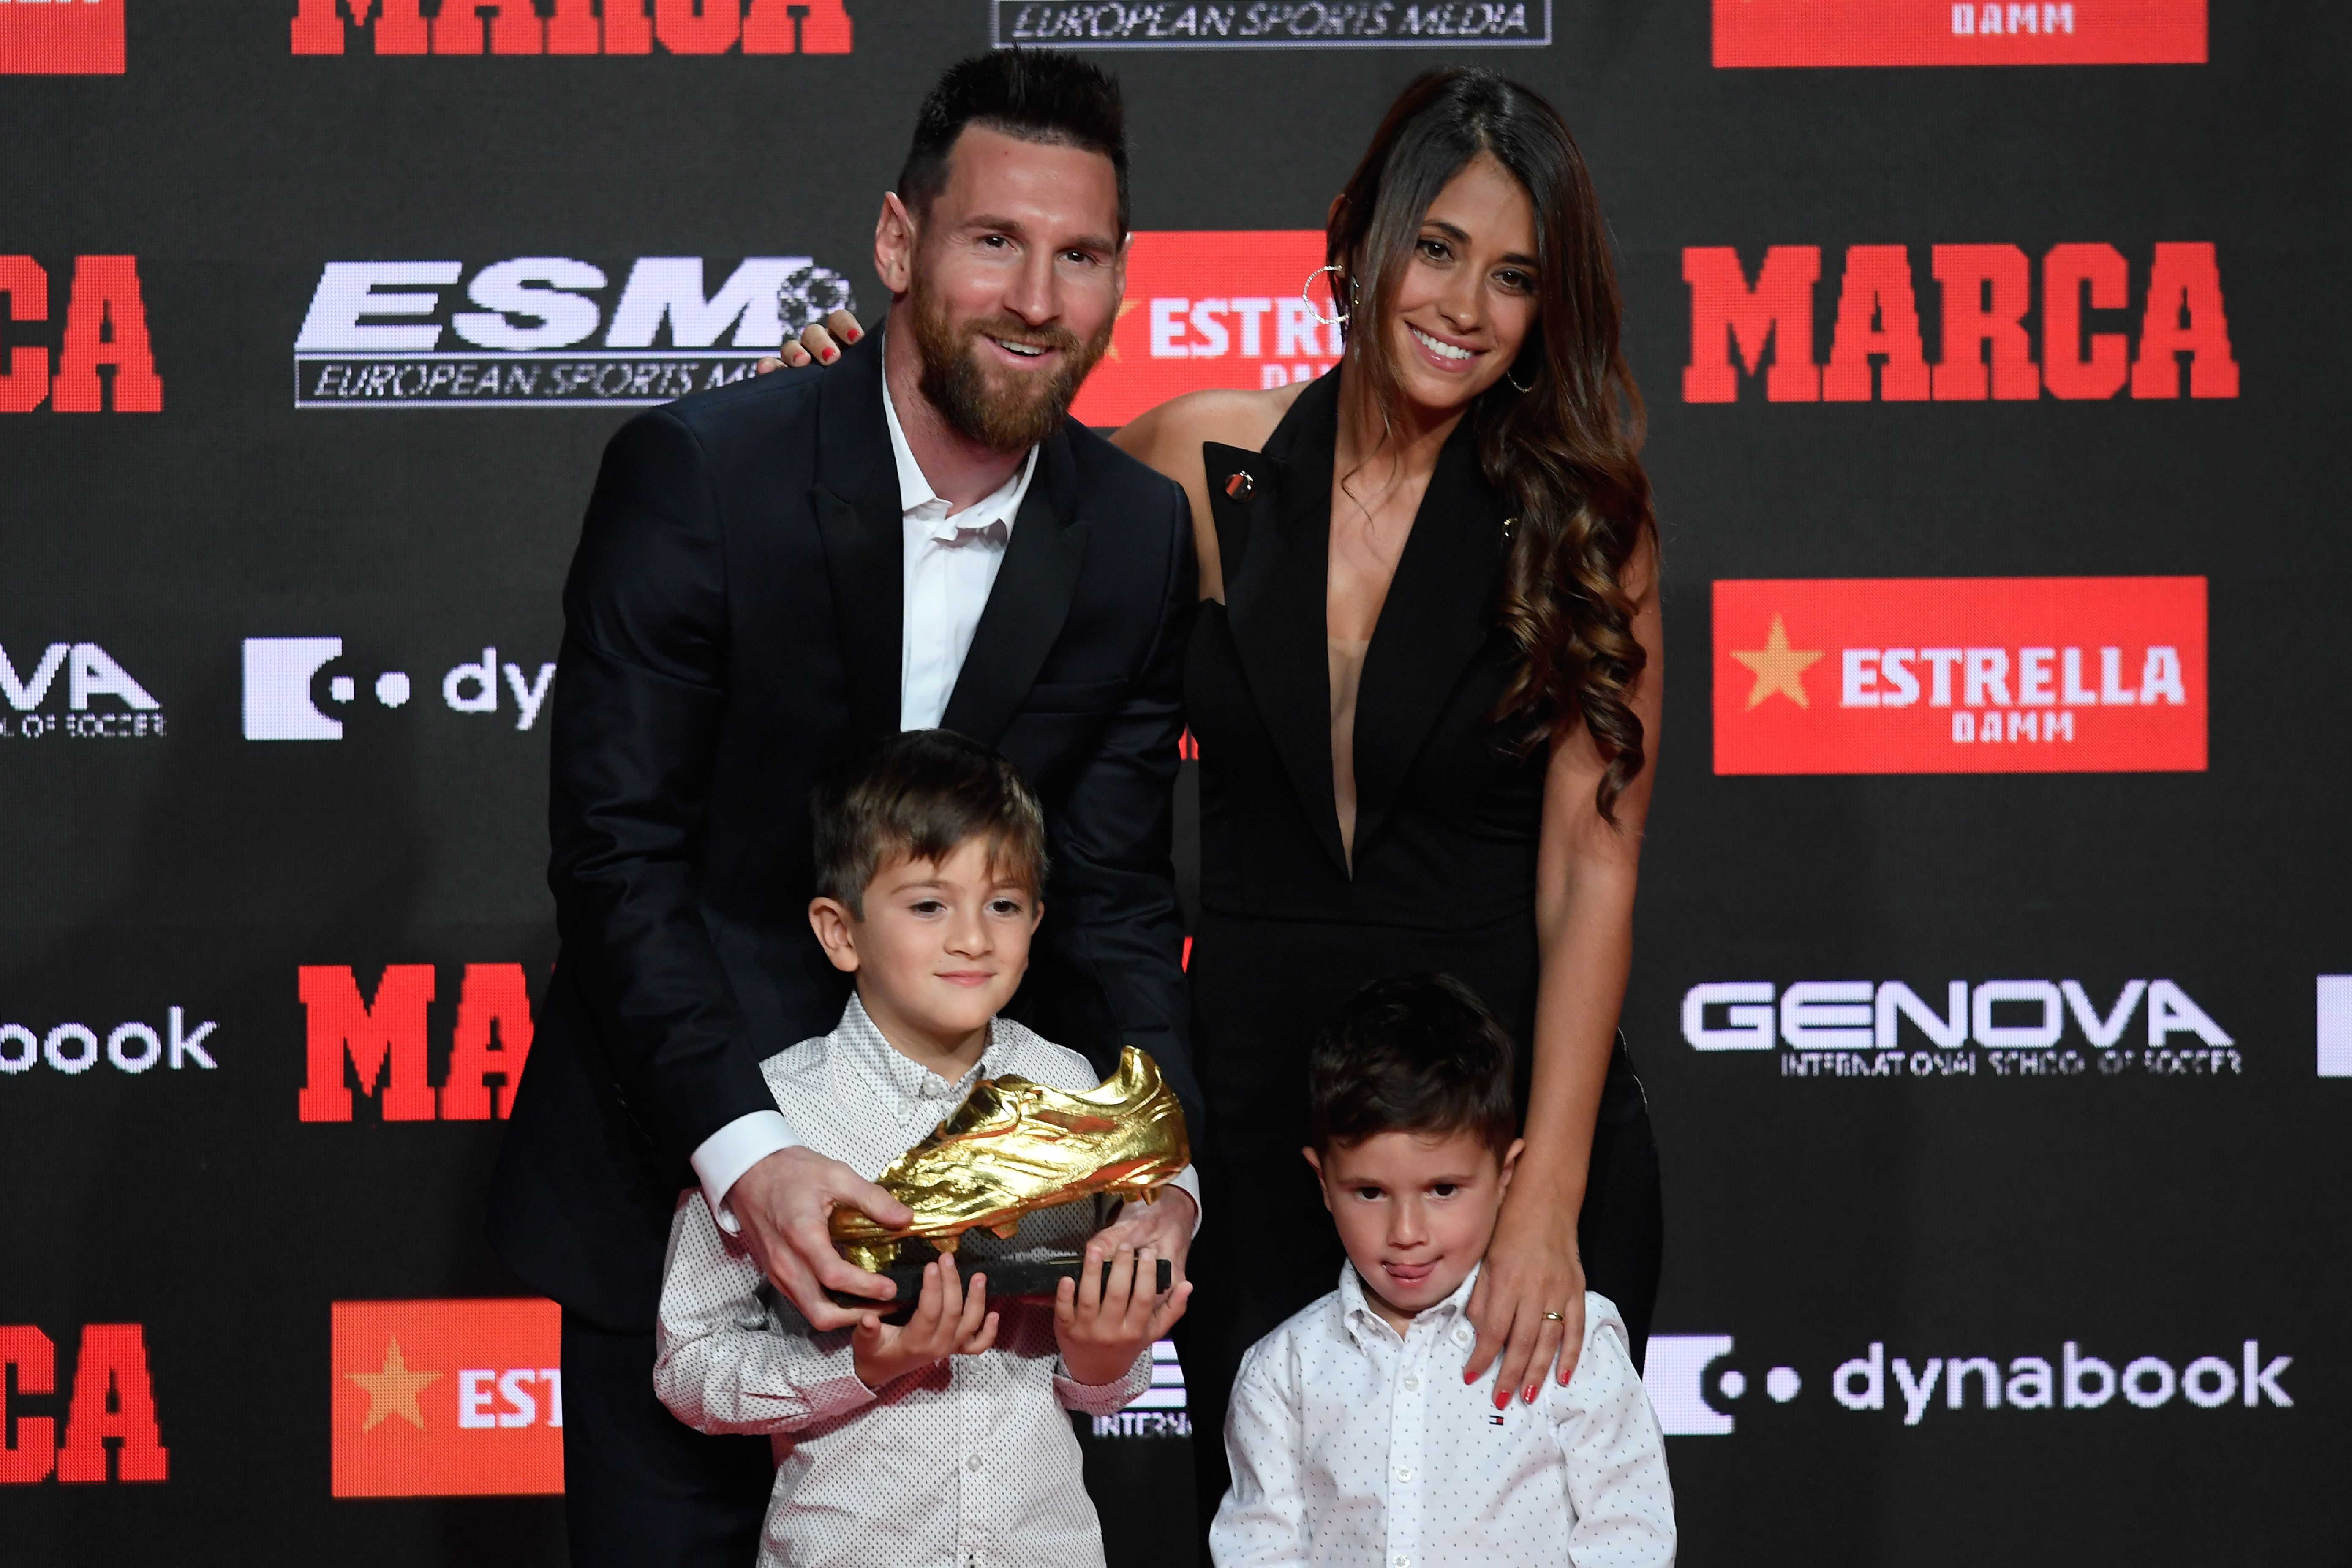 Lionel Messi poses with his wife Antonella Roccuzzo and two sons, Thiago and Mateo, after winning another Golden Shoe award